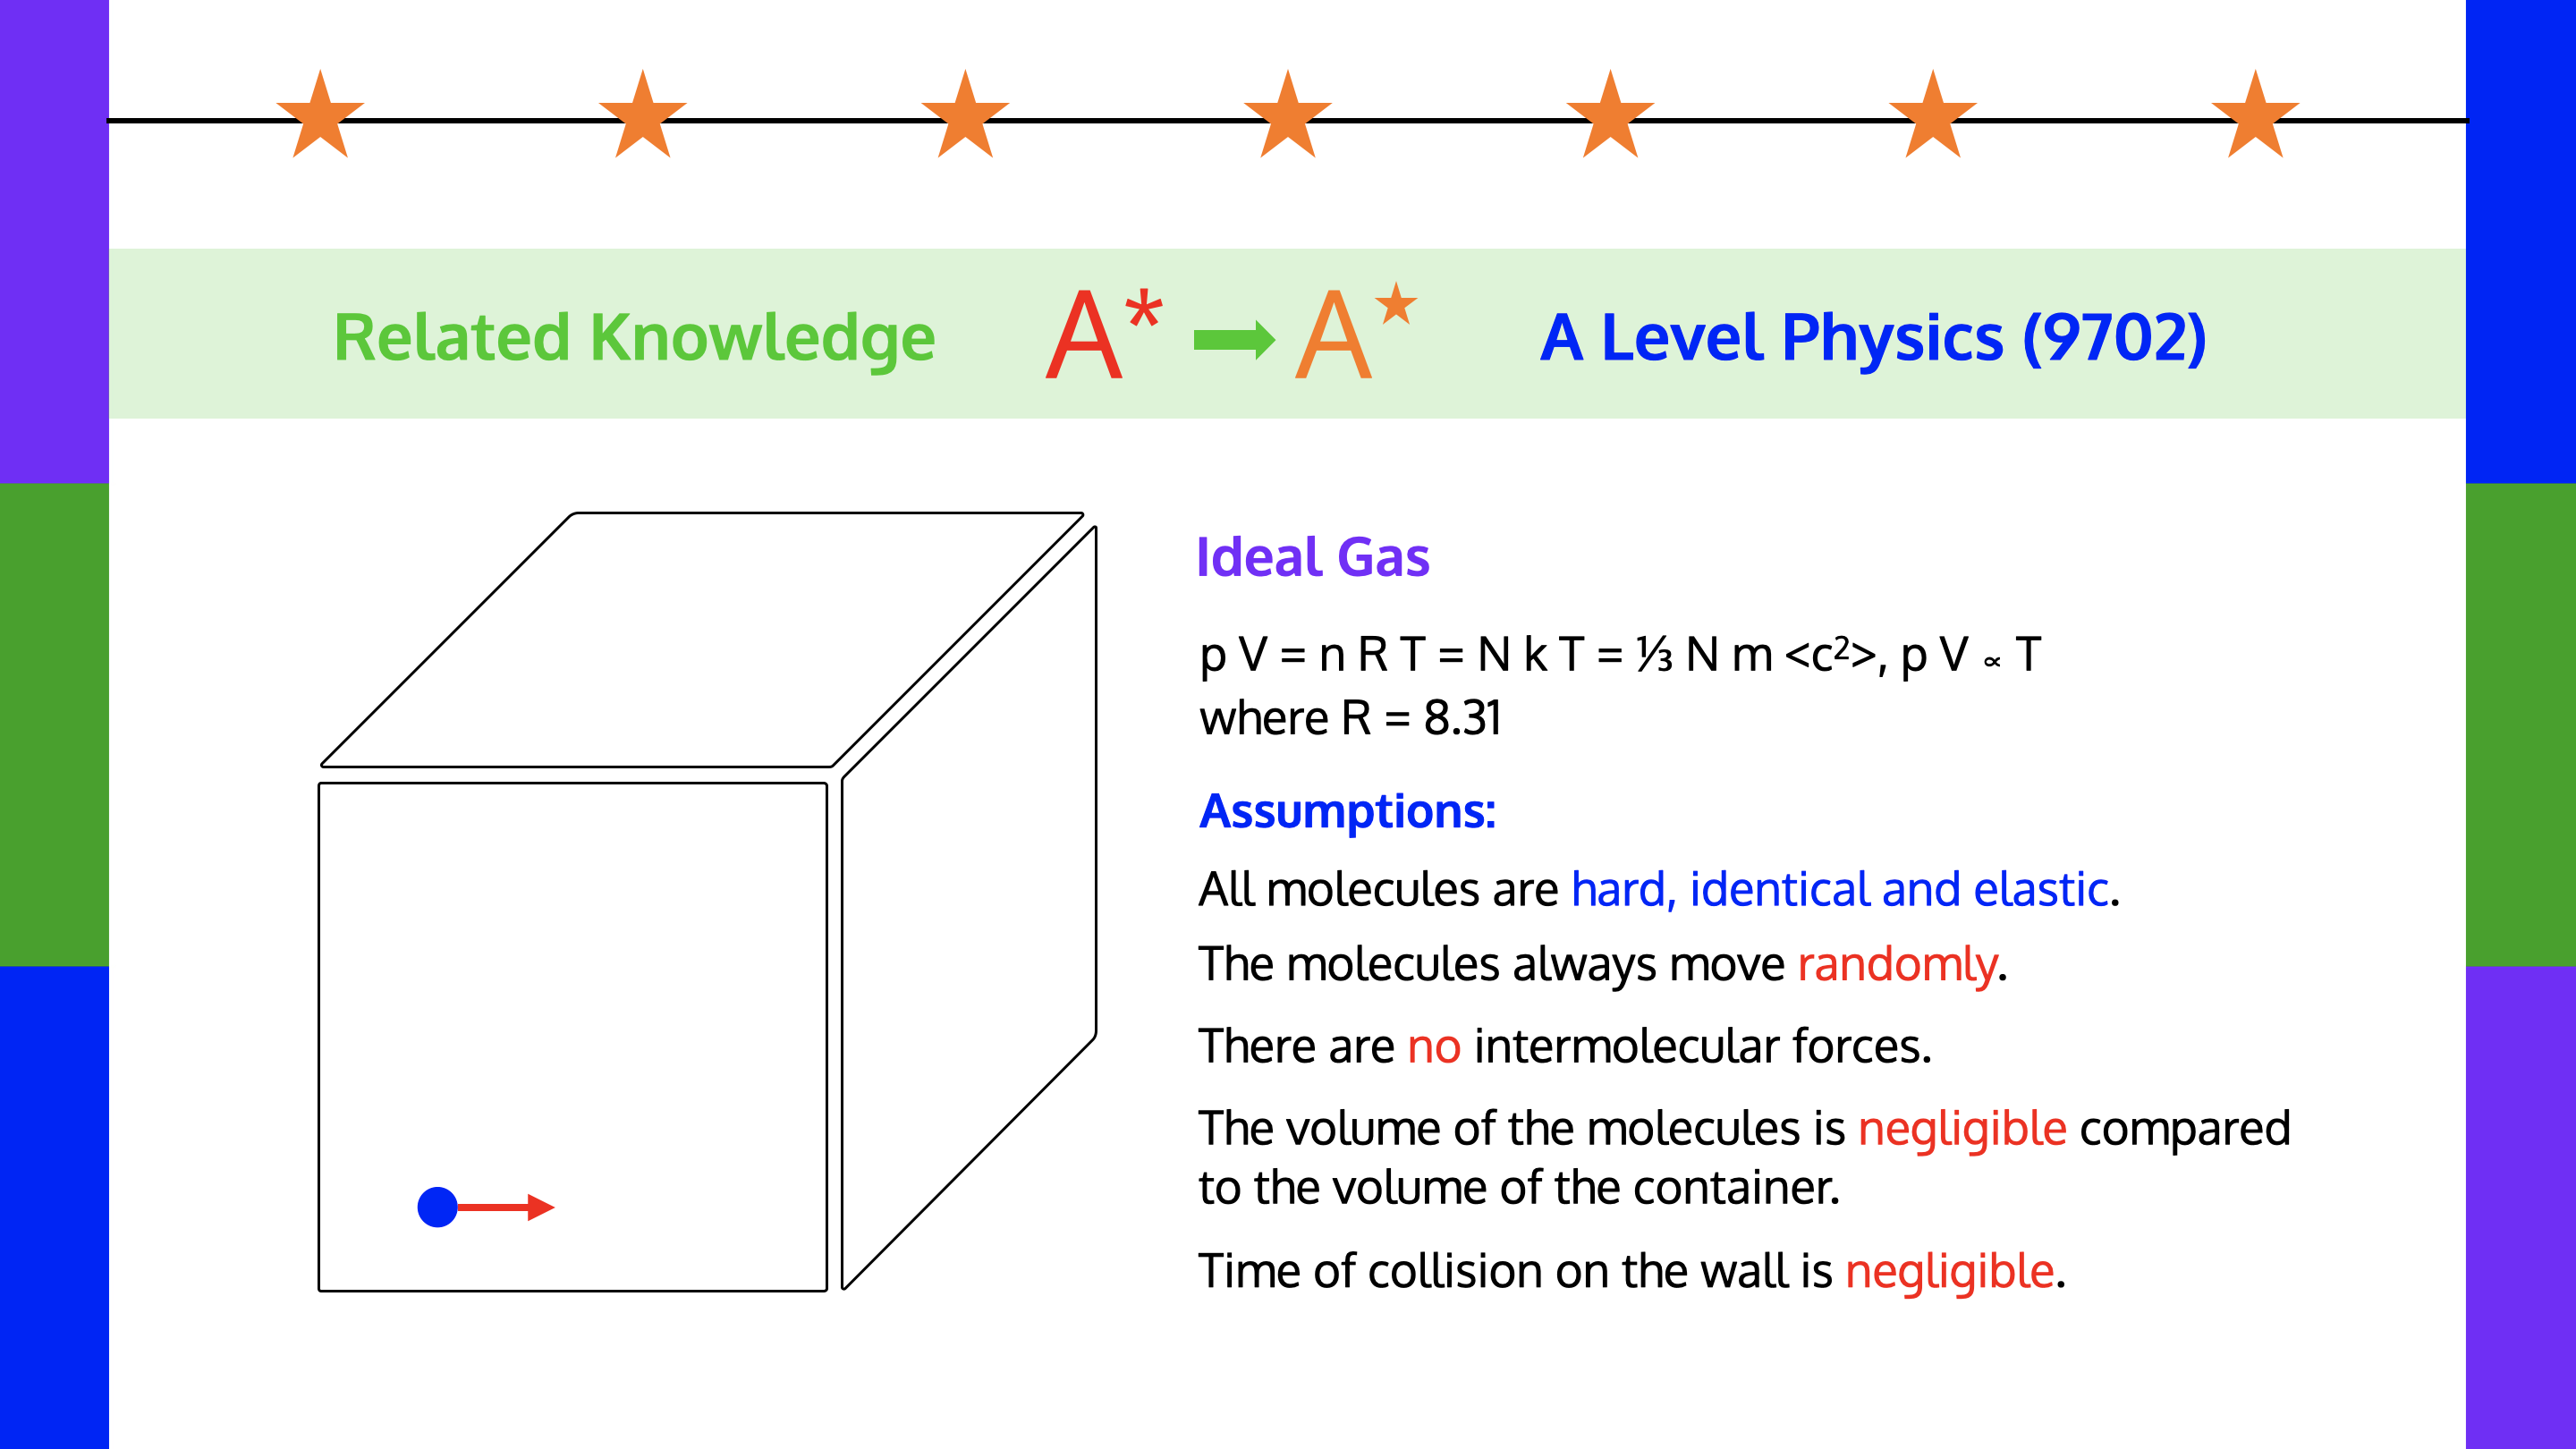 Physics (9702) Knowledge: Ideal Gas